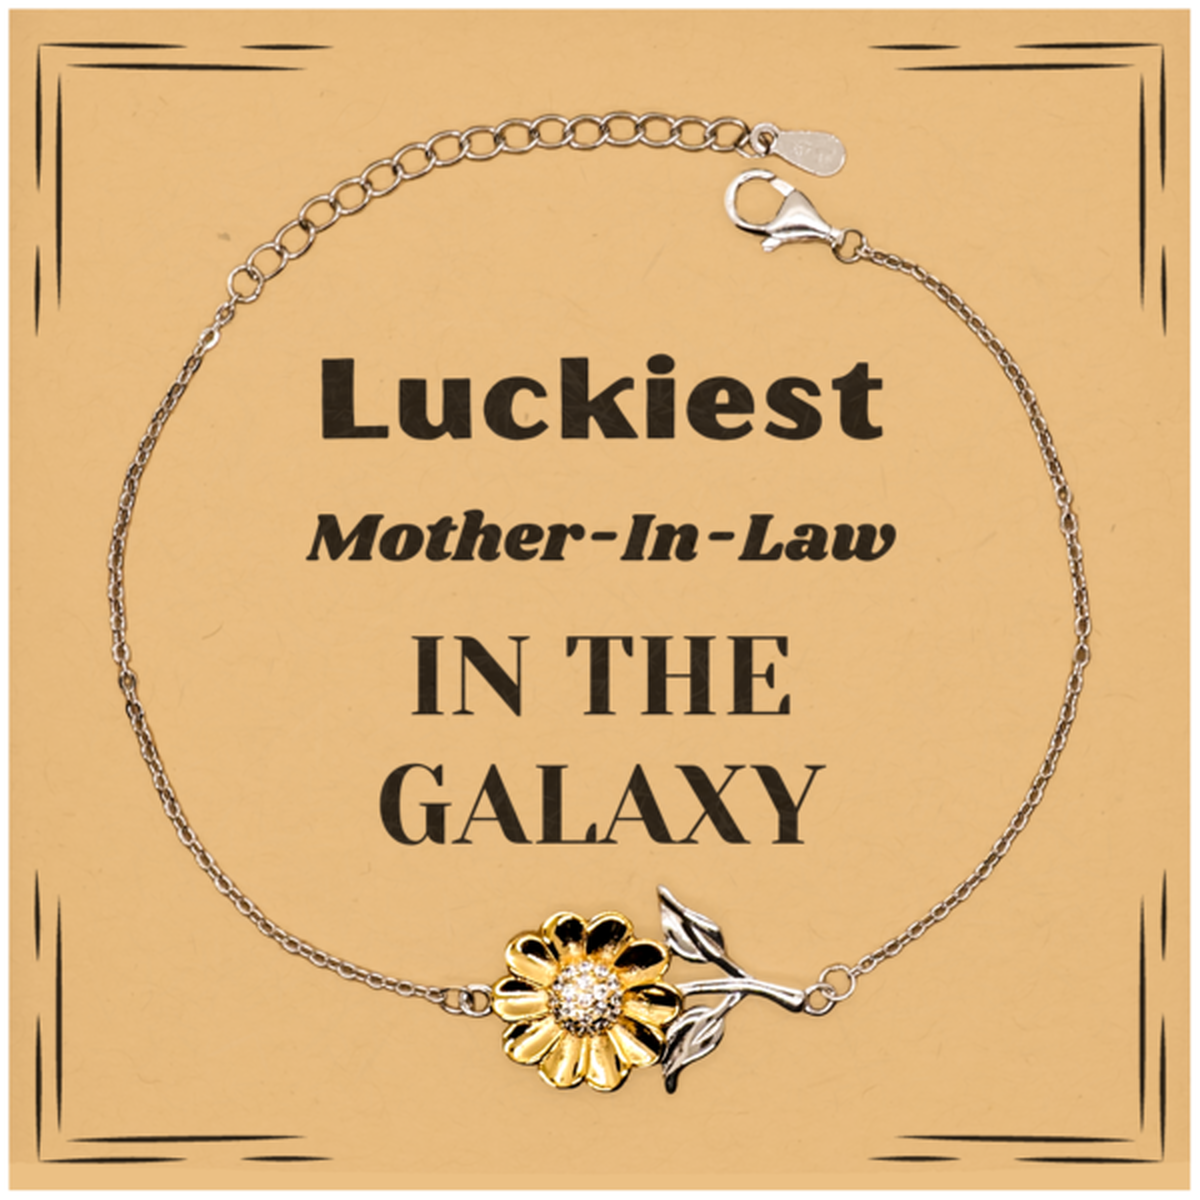 Luckiest Mother-In-Law in the Galaxy, To My Mother-In-Law Message Card Gifts, Christmas Mother-In-Law Sunflower Bracelet Gifts, X-mas Birthday Unique Gifts For Mother-In-Law Men Women